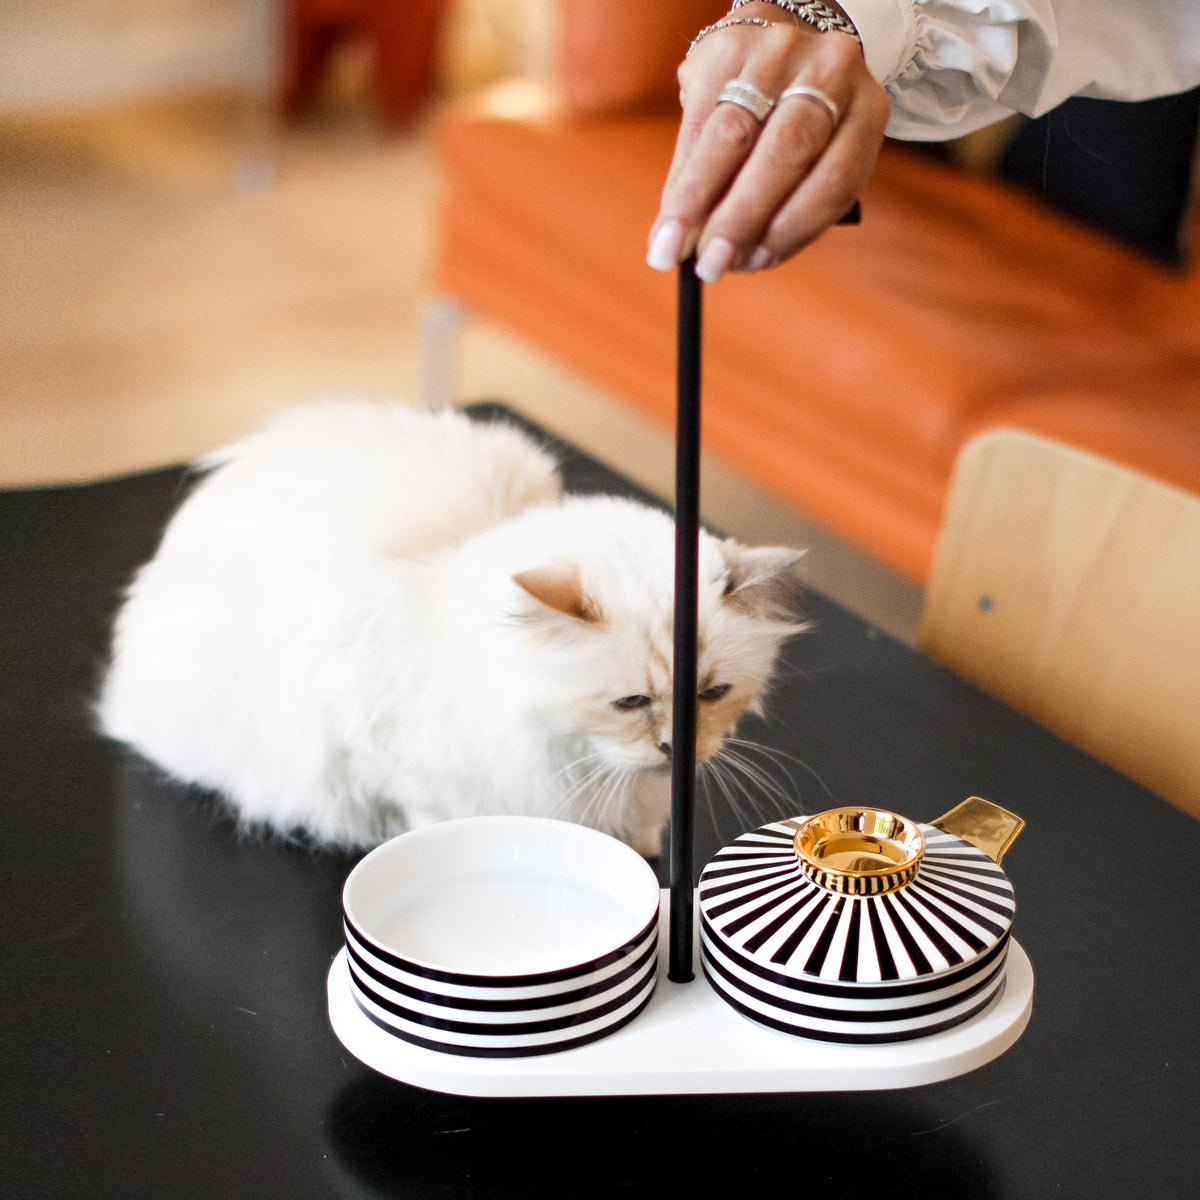 Choupette dining at table